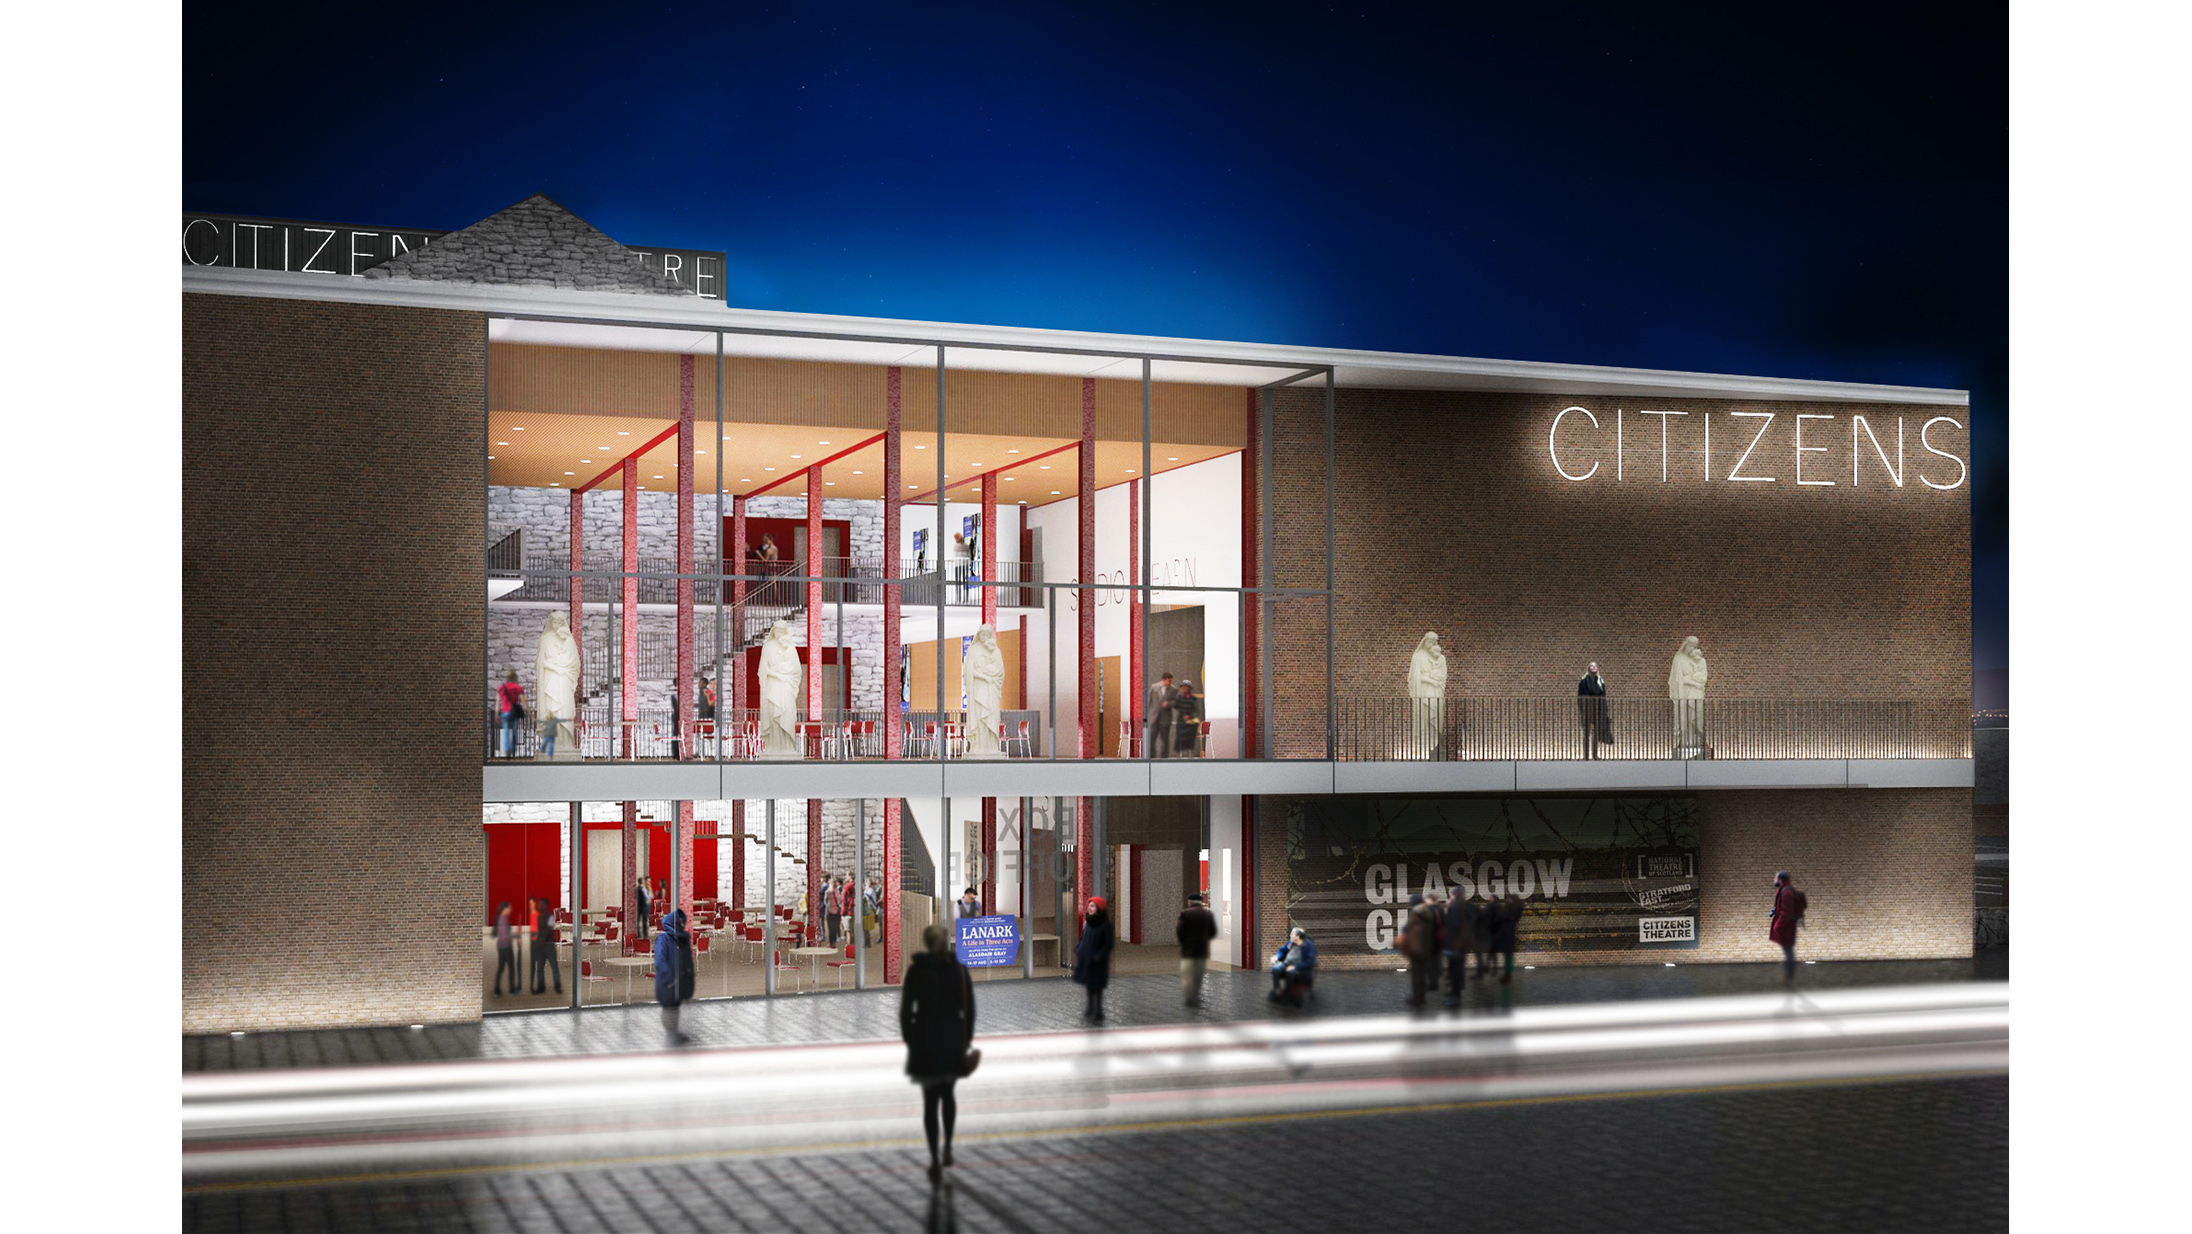 Council boosts Citizens Theatre redevelopment fund by £1m